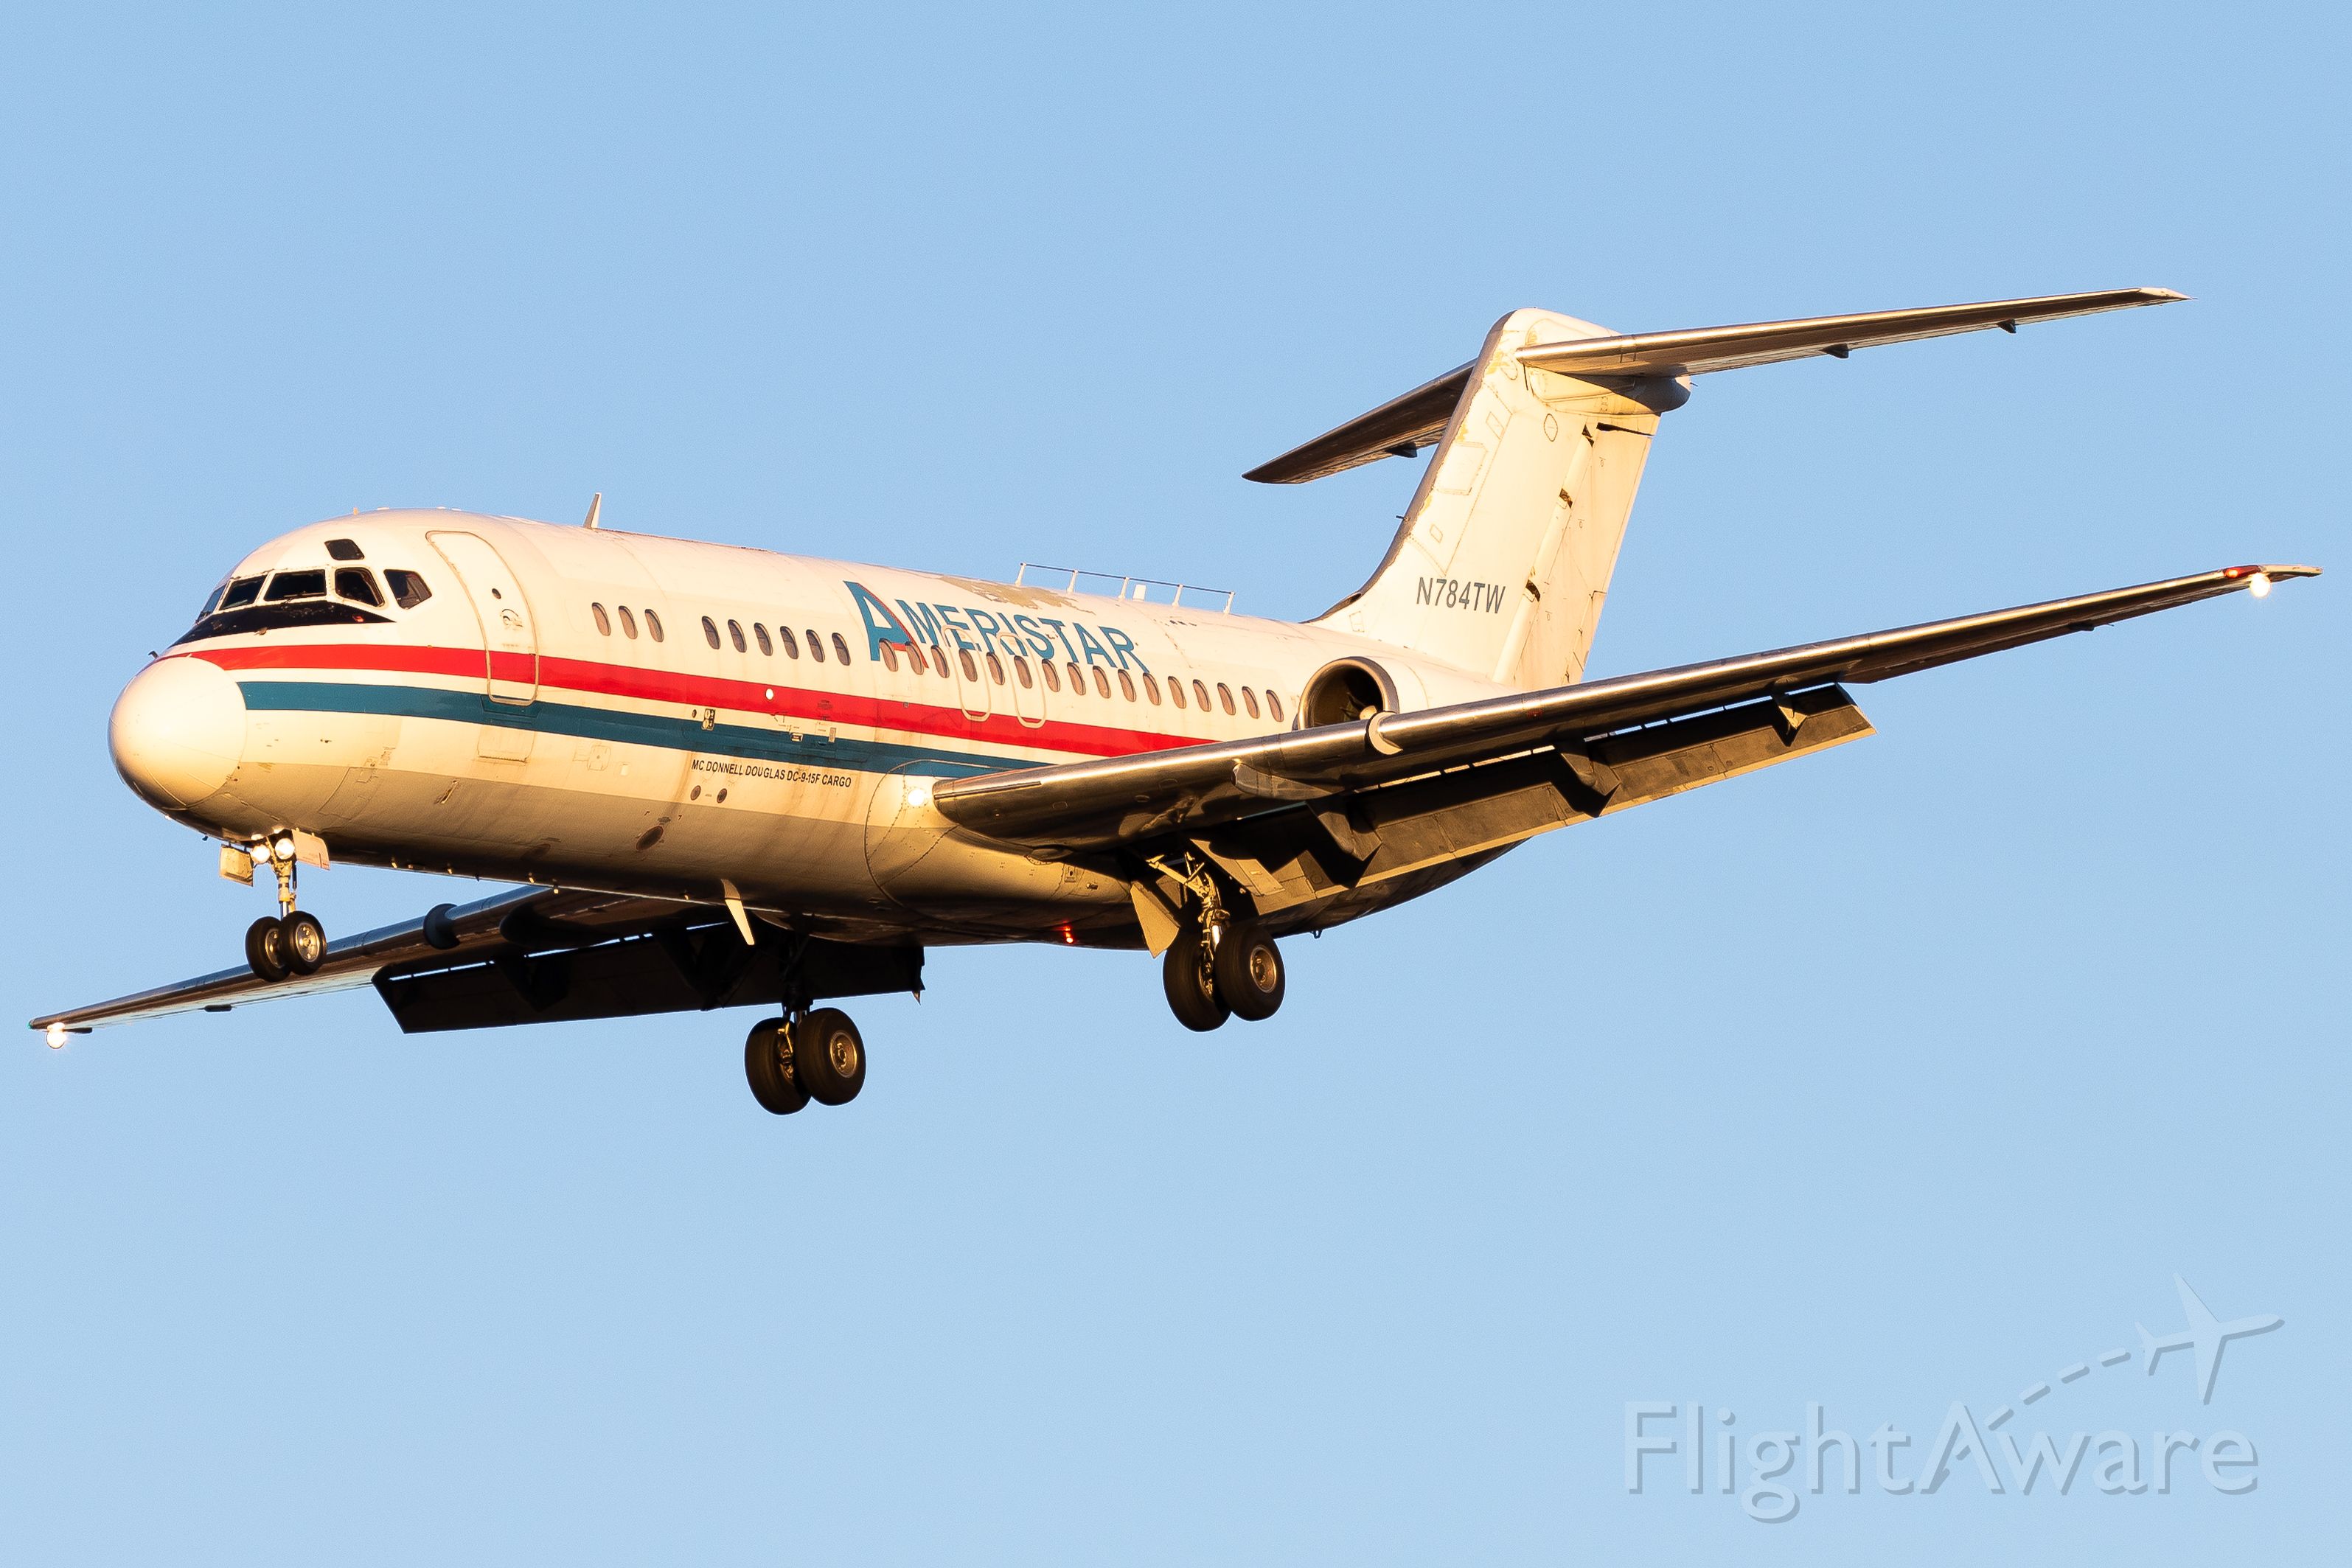 Douglas DC-9-10 (N784TW) - The DC9 is alive in 2021 :) So stoked to get another classic in this amazing winter light!